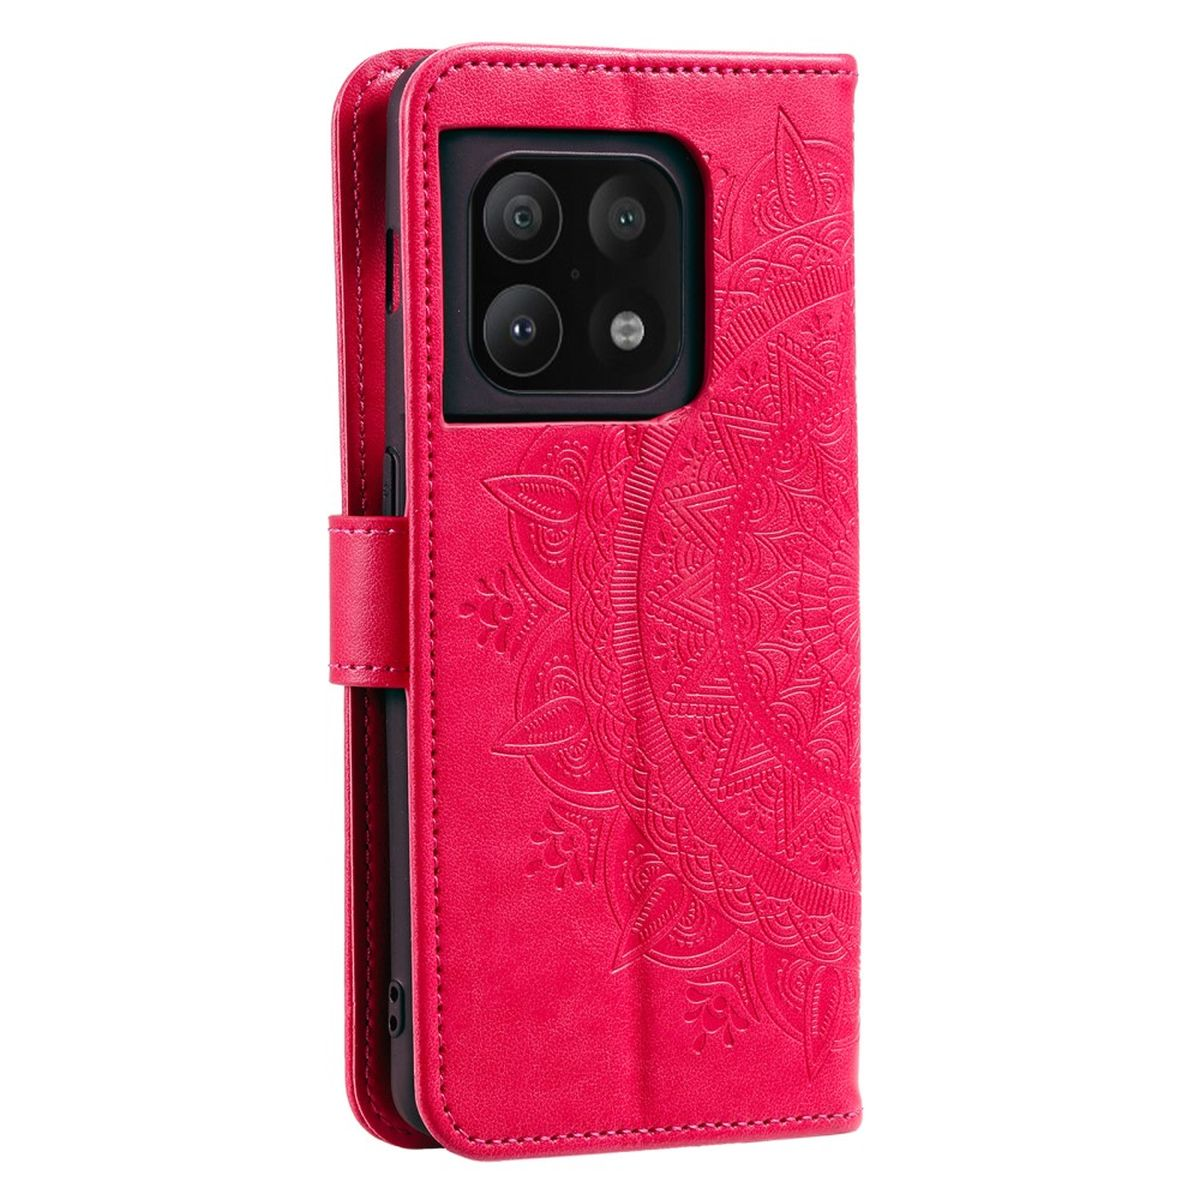 COVERKINGZ Klapphülle mit 10 5G, Muster, Pink OnePlus, Mandala Bookcover, Pro